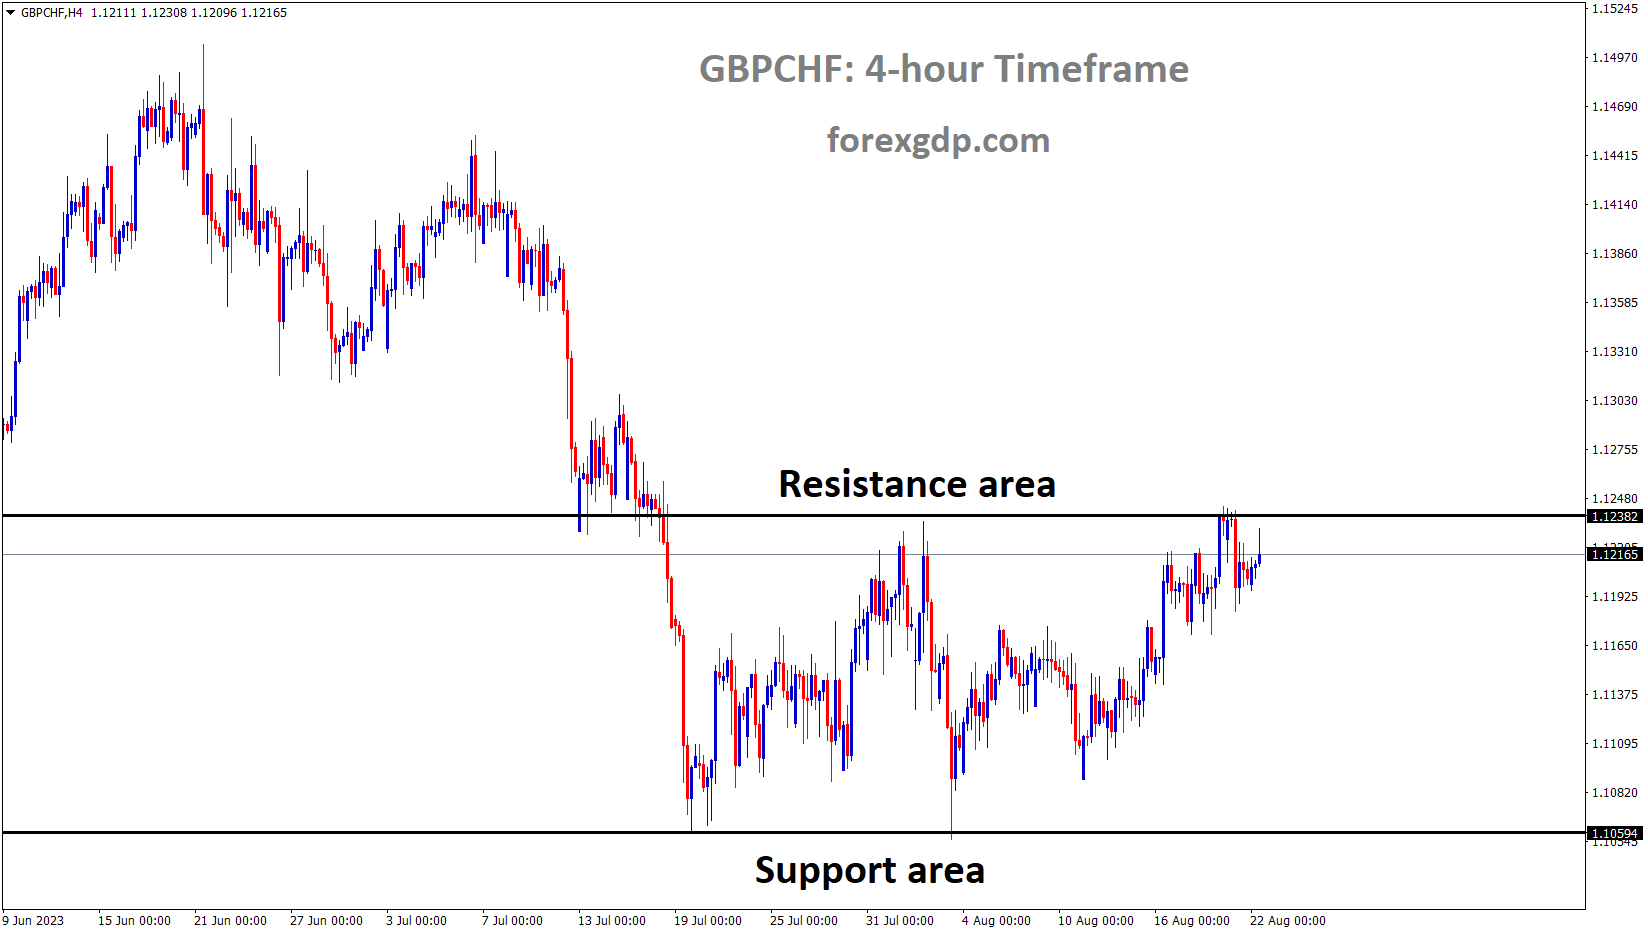 GBPCHF is moving in the box pattern and the market has reached the resistance area of the pattern